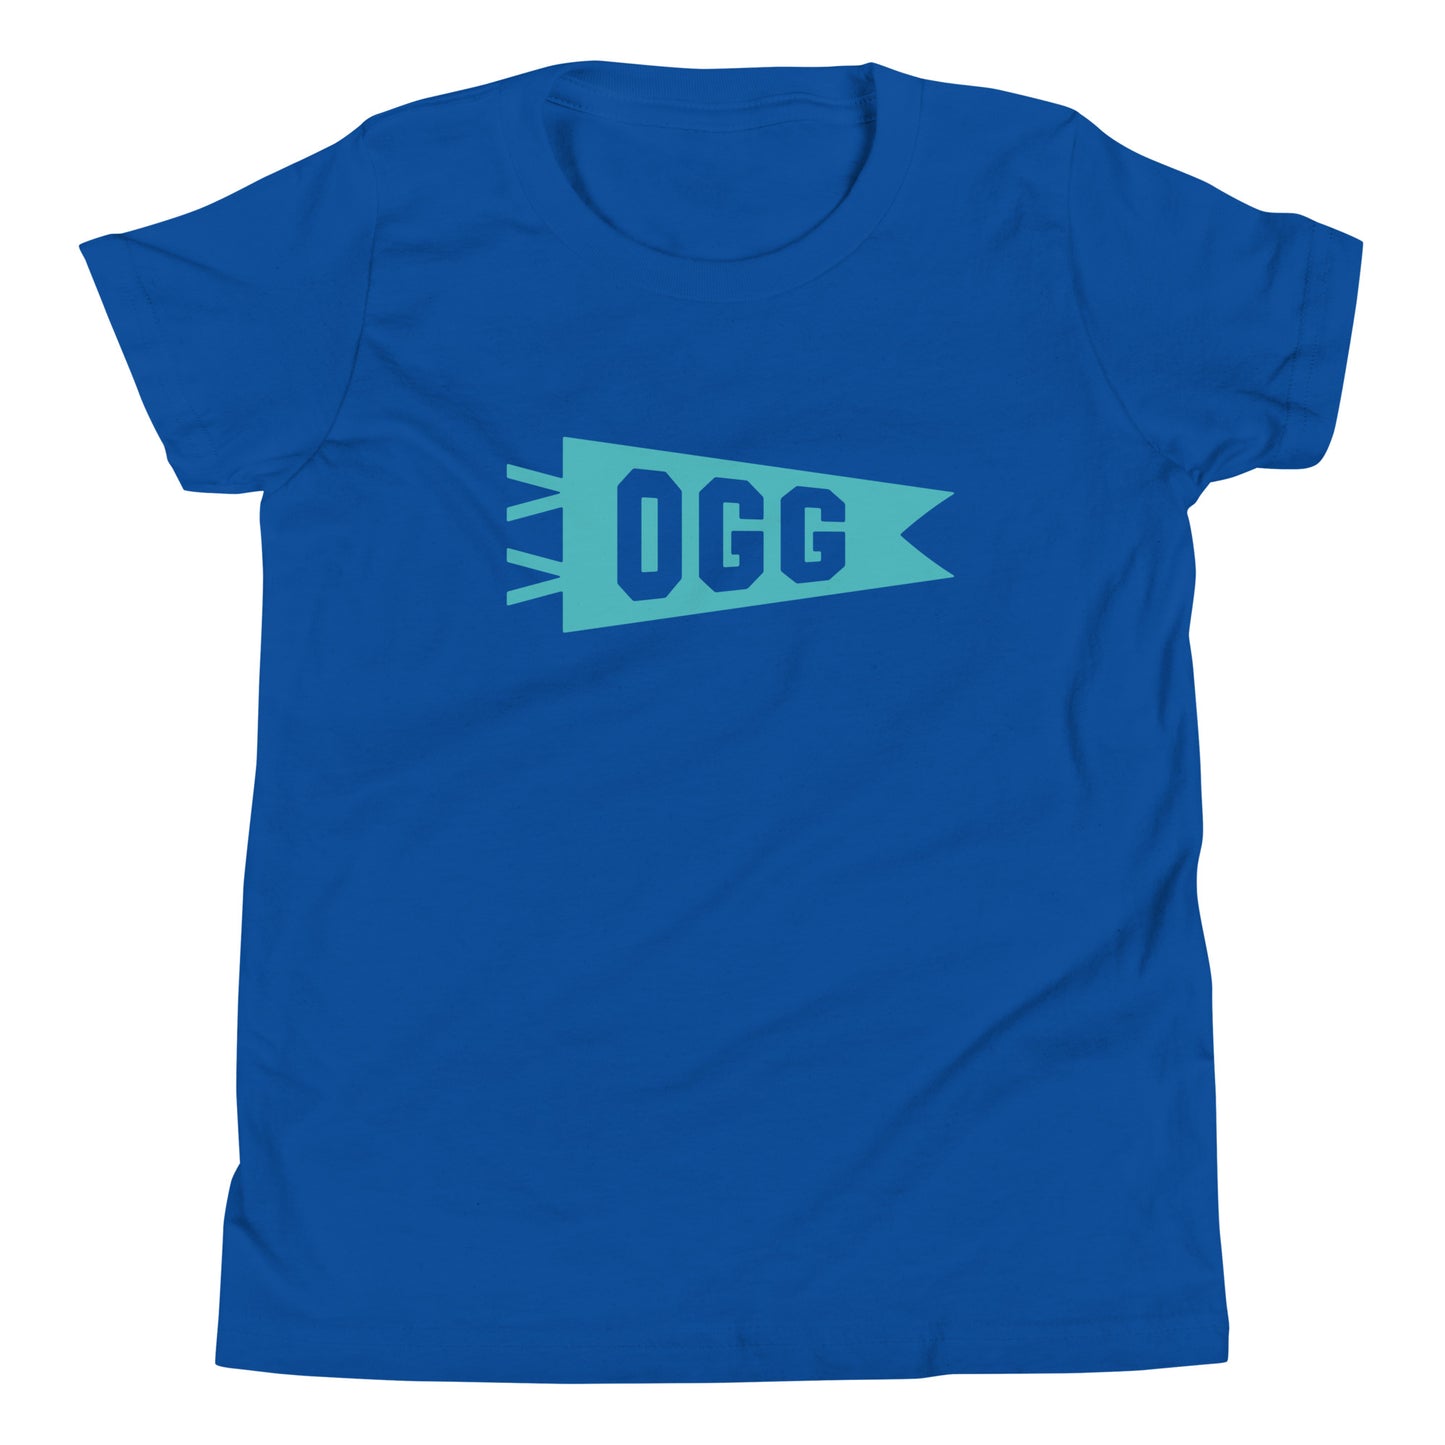 Kid's Airport Code Tee - Viking Blue Graphic • OGG Maui • YHM Designs - Image 02